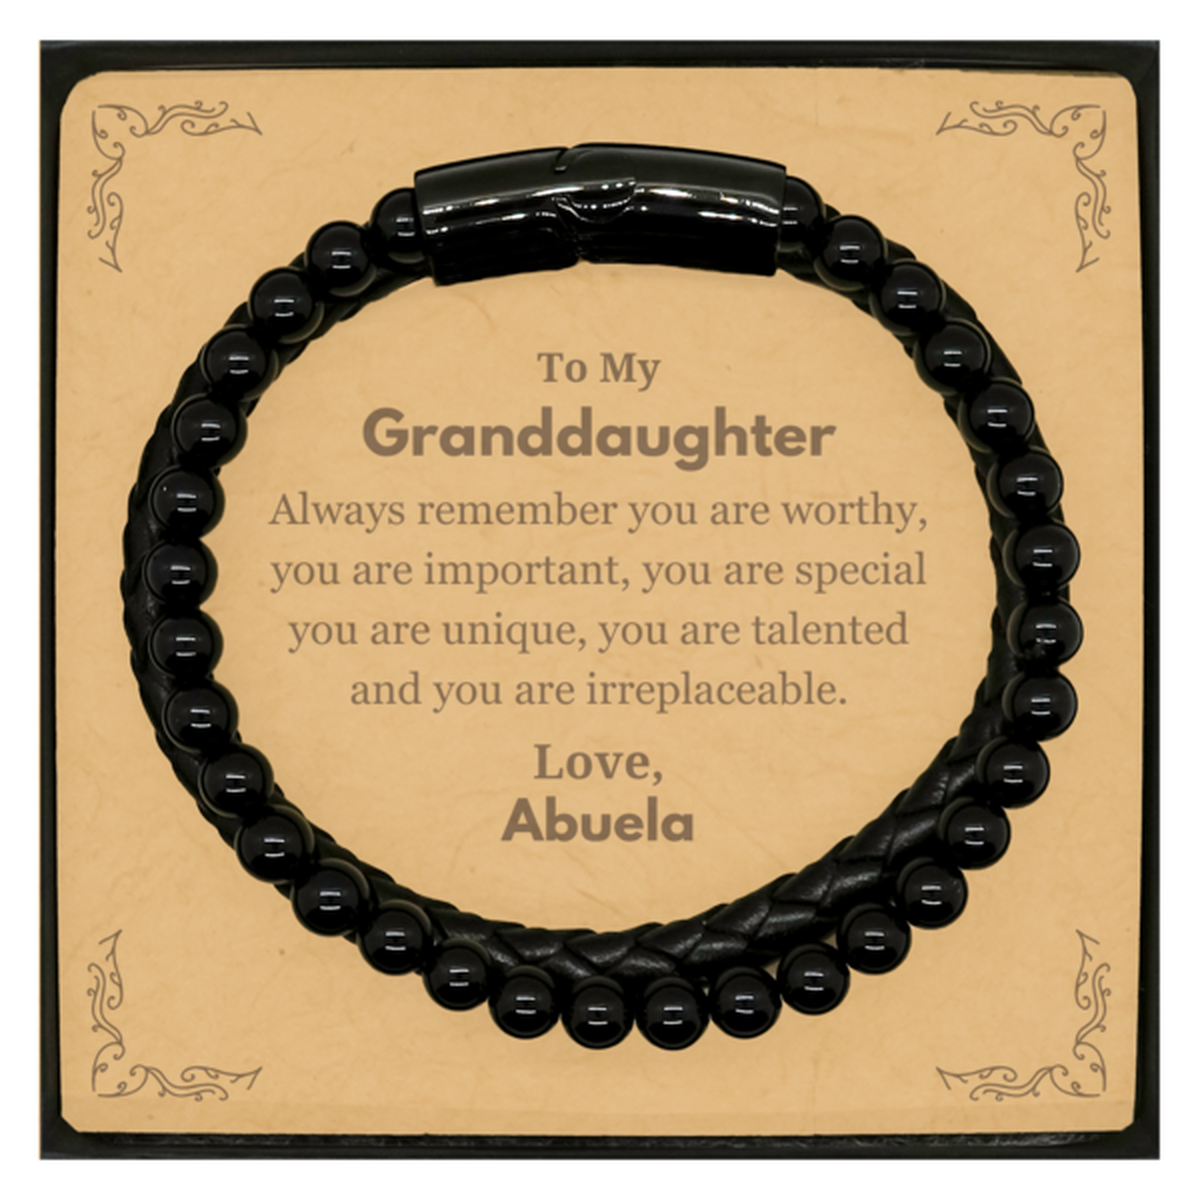 Granddaughter Birthday Gifts from Abuela, Inspirational Stone Leather Bracelets for Granddaughter Christmas Graduation Gifts for Granddaughter Always remember you are worthy, you are important. Love, Abuela